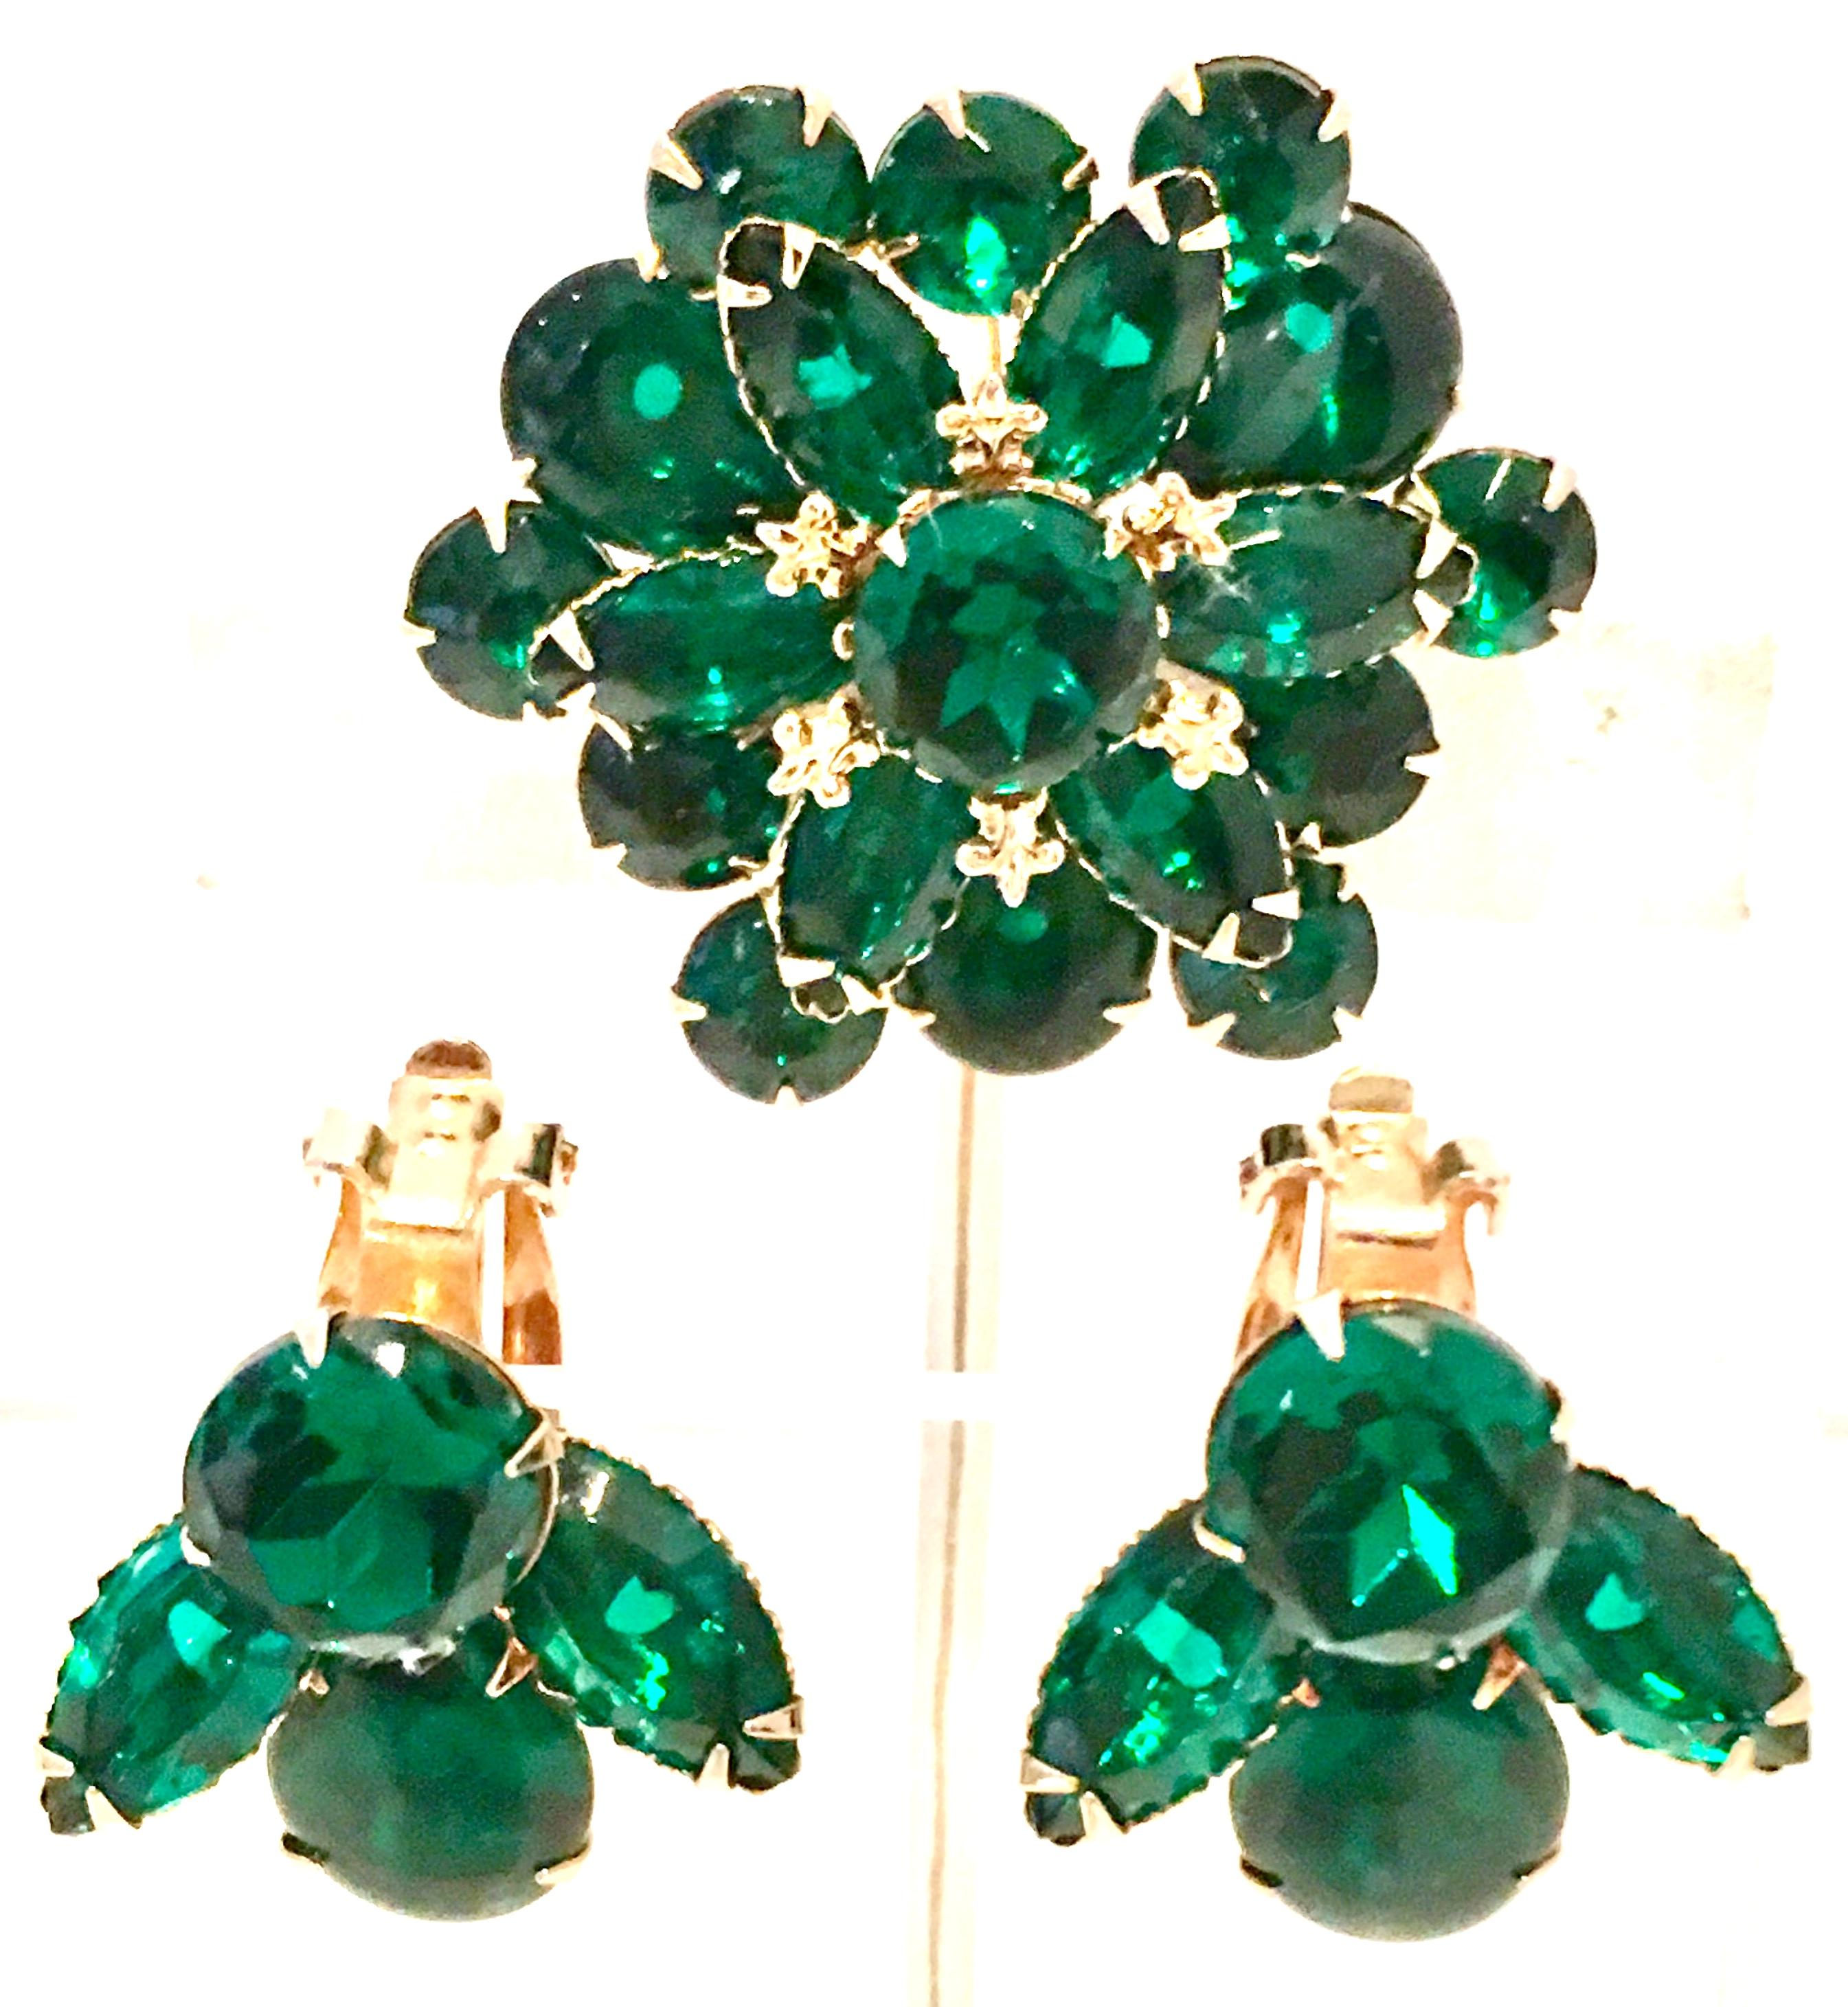 1950'S Classic French Style Fleur De Lis Gold Plate & Emerald Green Molded Glass, Brilliant Austrian Cut Crystal, Abstract Flower & Bubble Bee Brooch And Earrings-Three Piece Set. This classic French style demi - parure features a large abstract